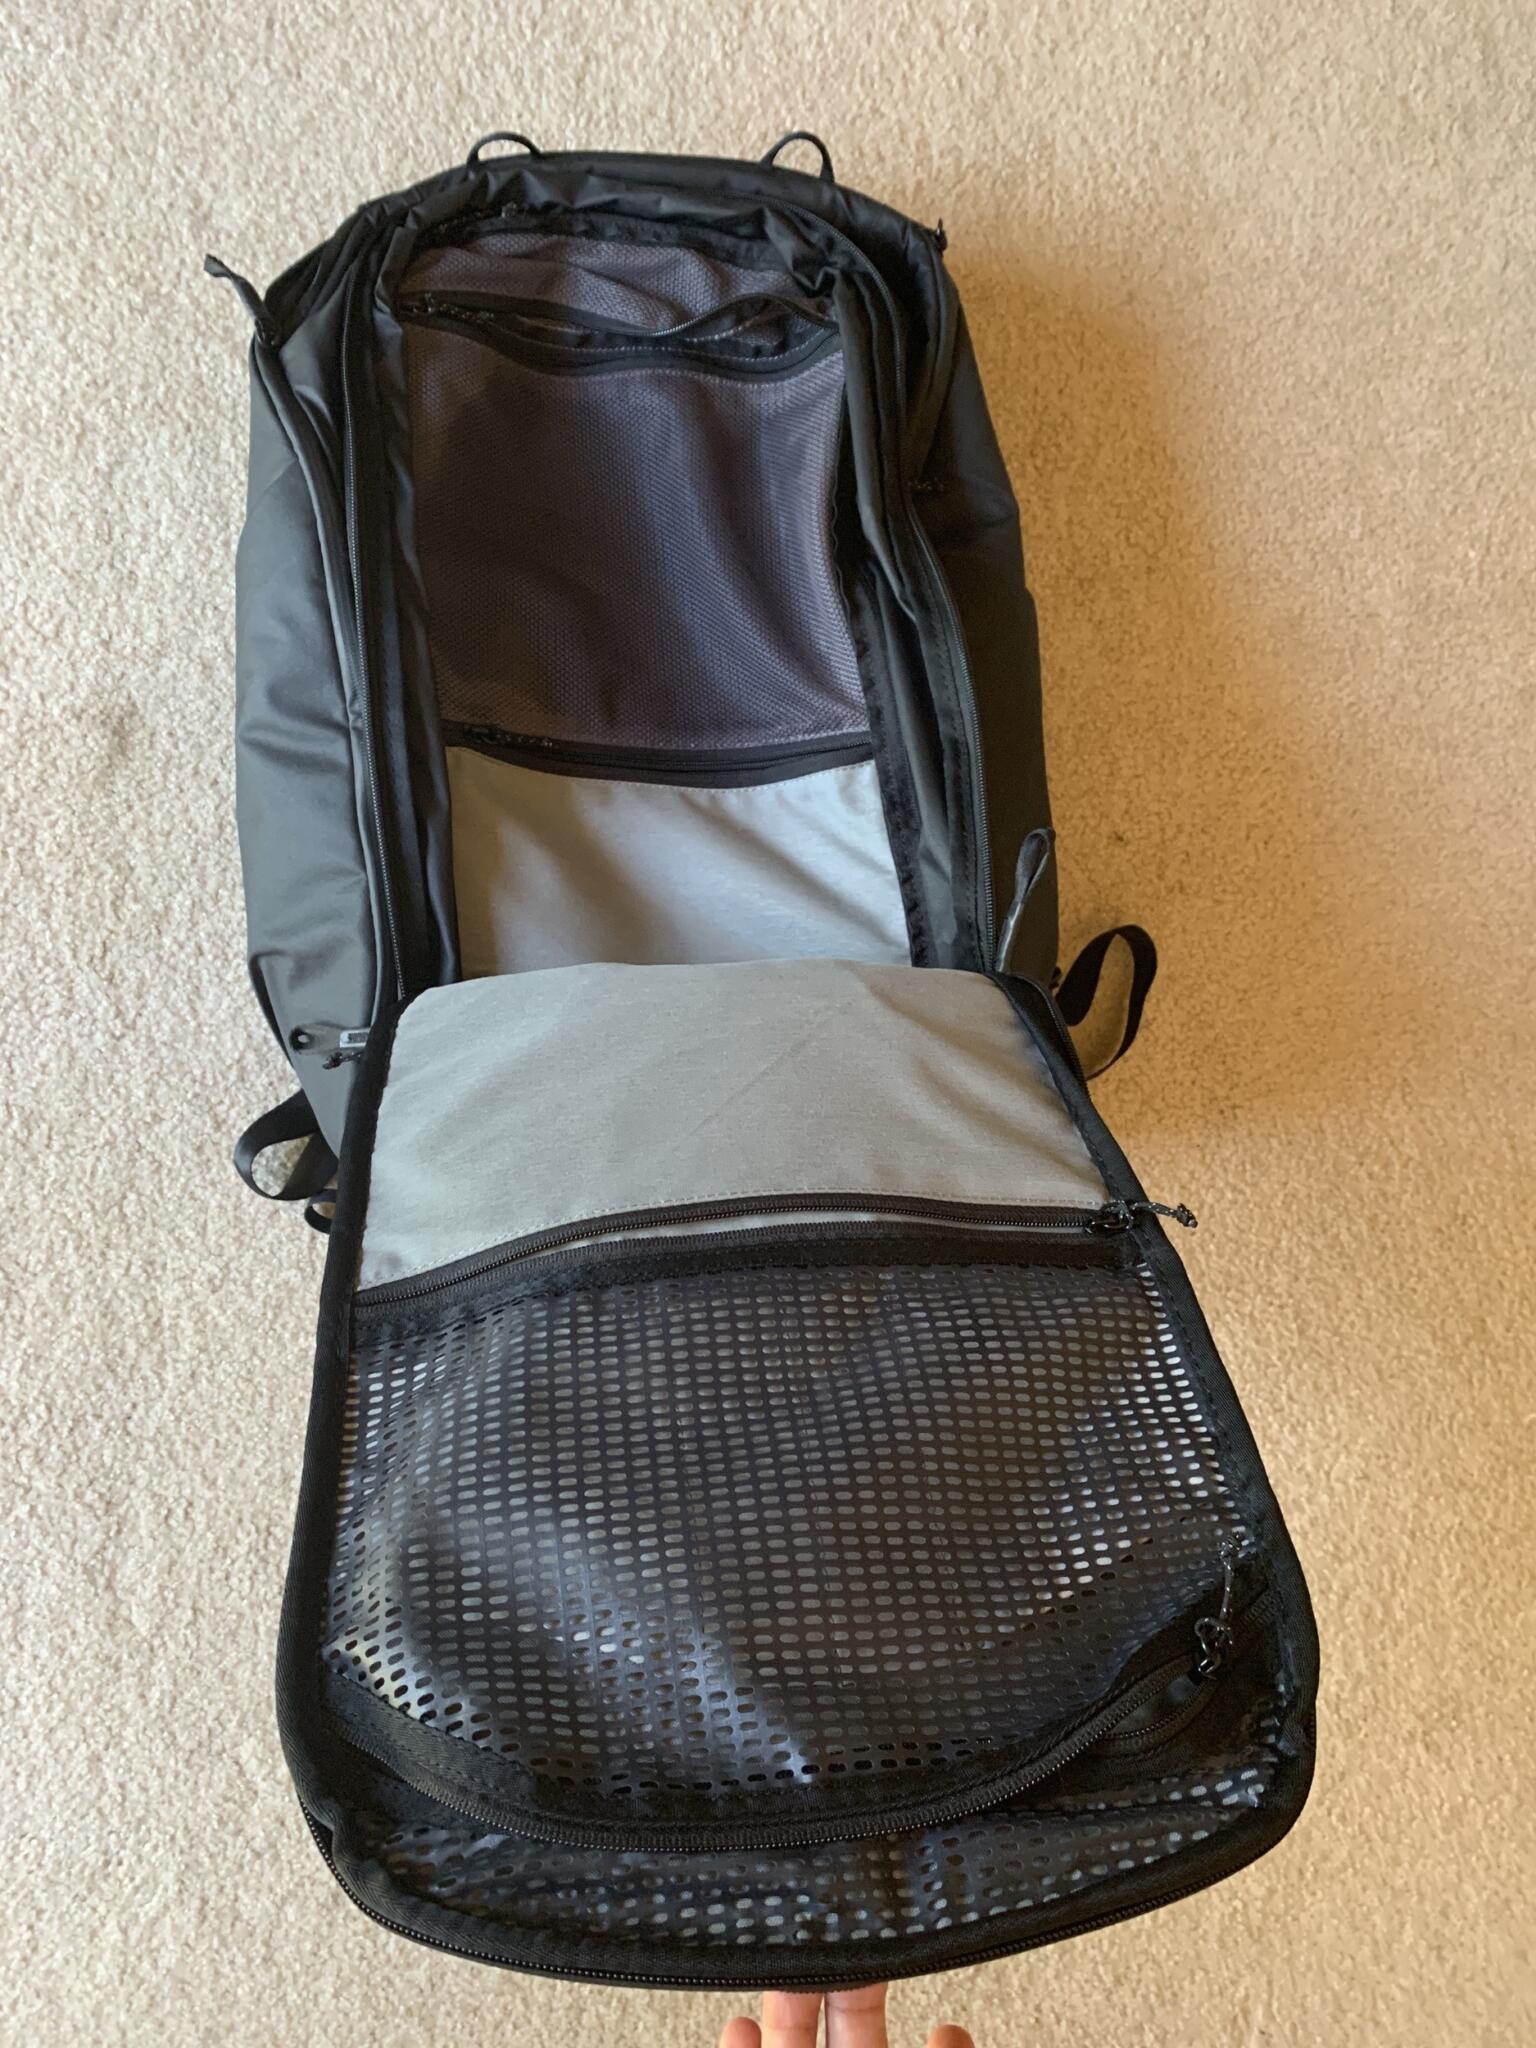 20D in Spring Europe with Peak Design 45L as a 5'3 + outfit